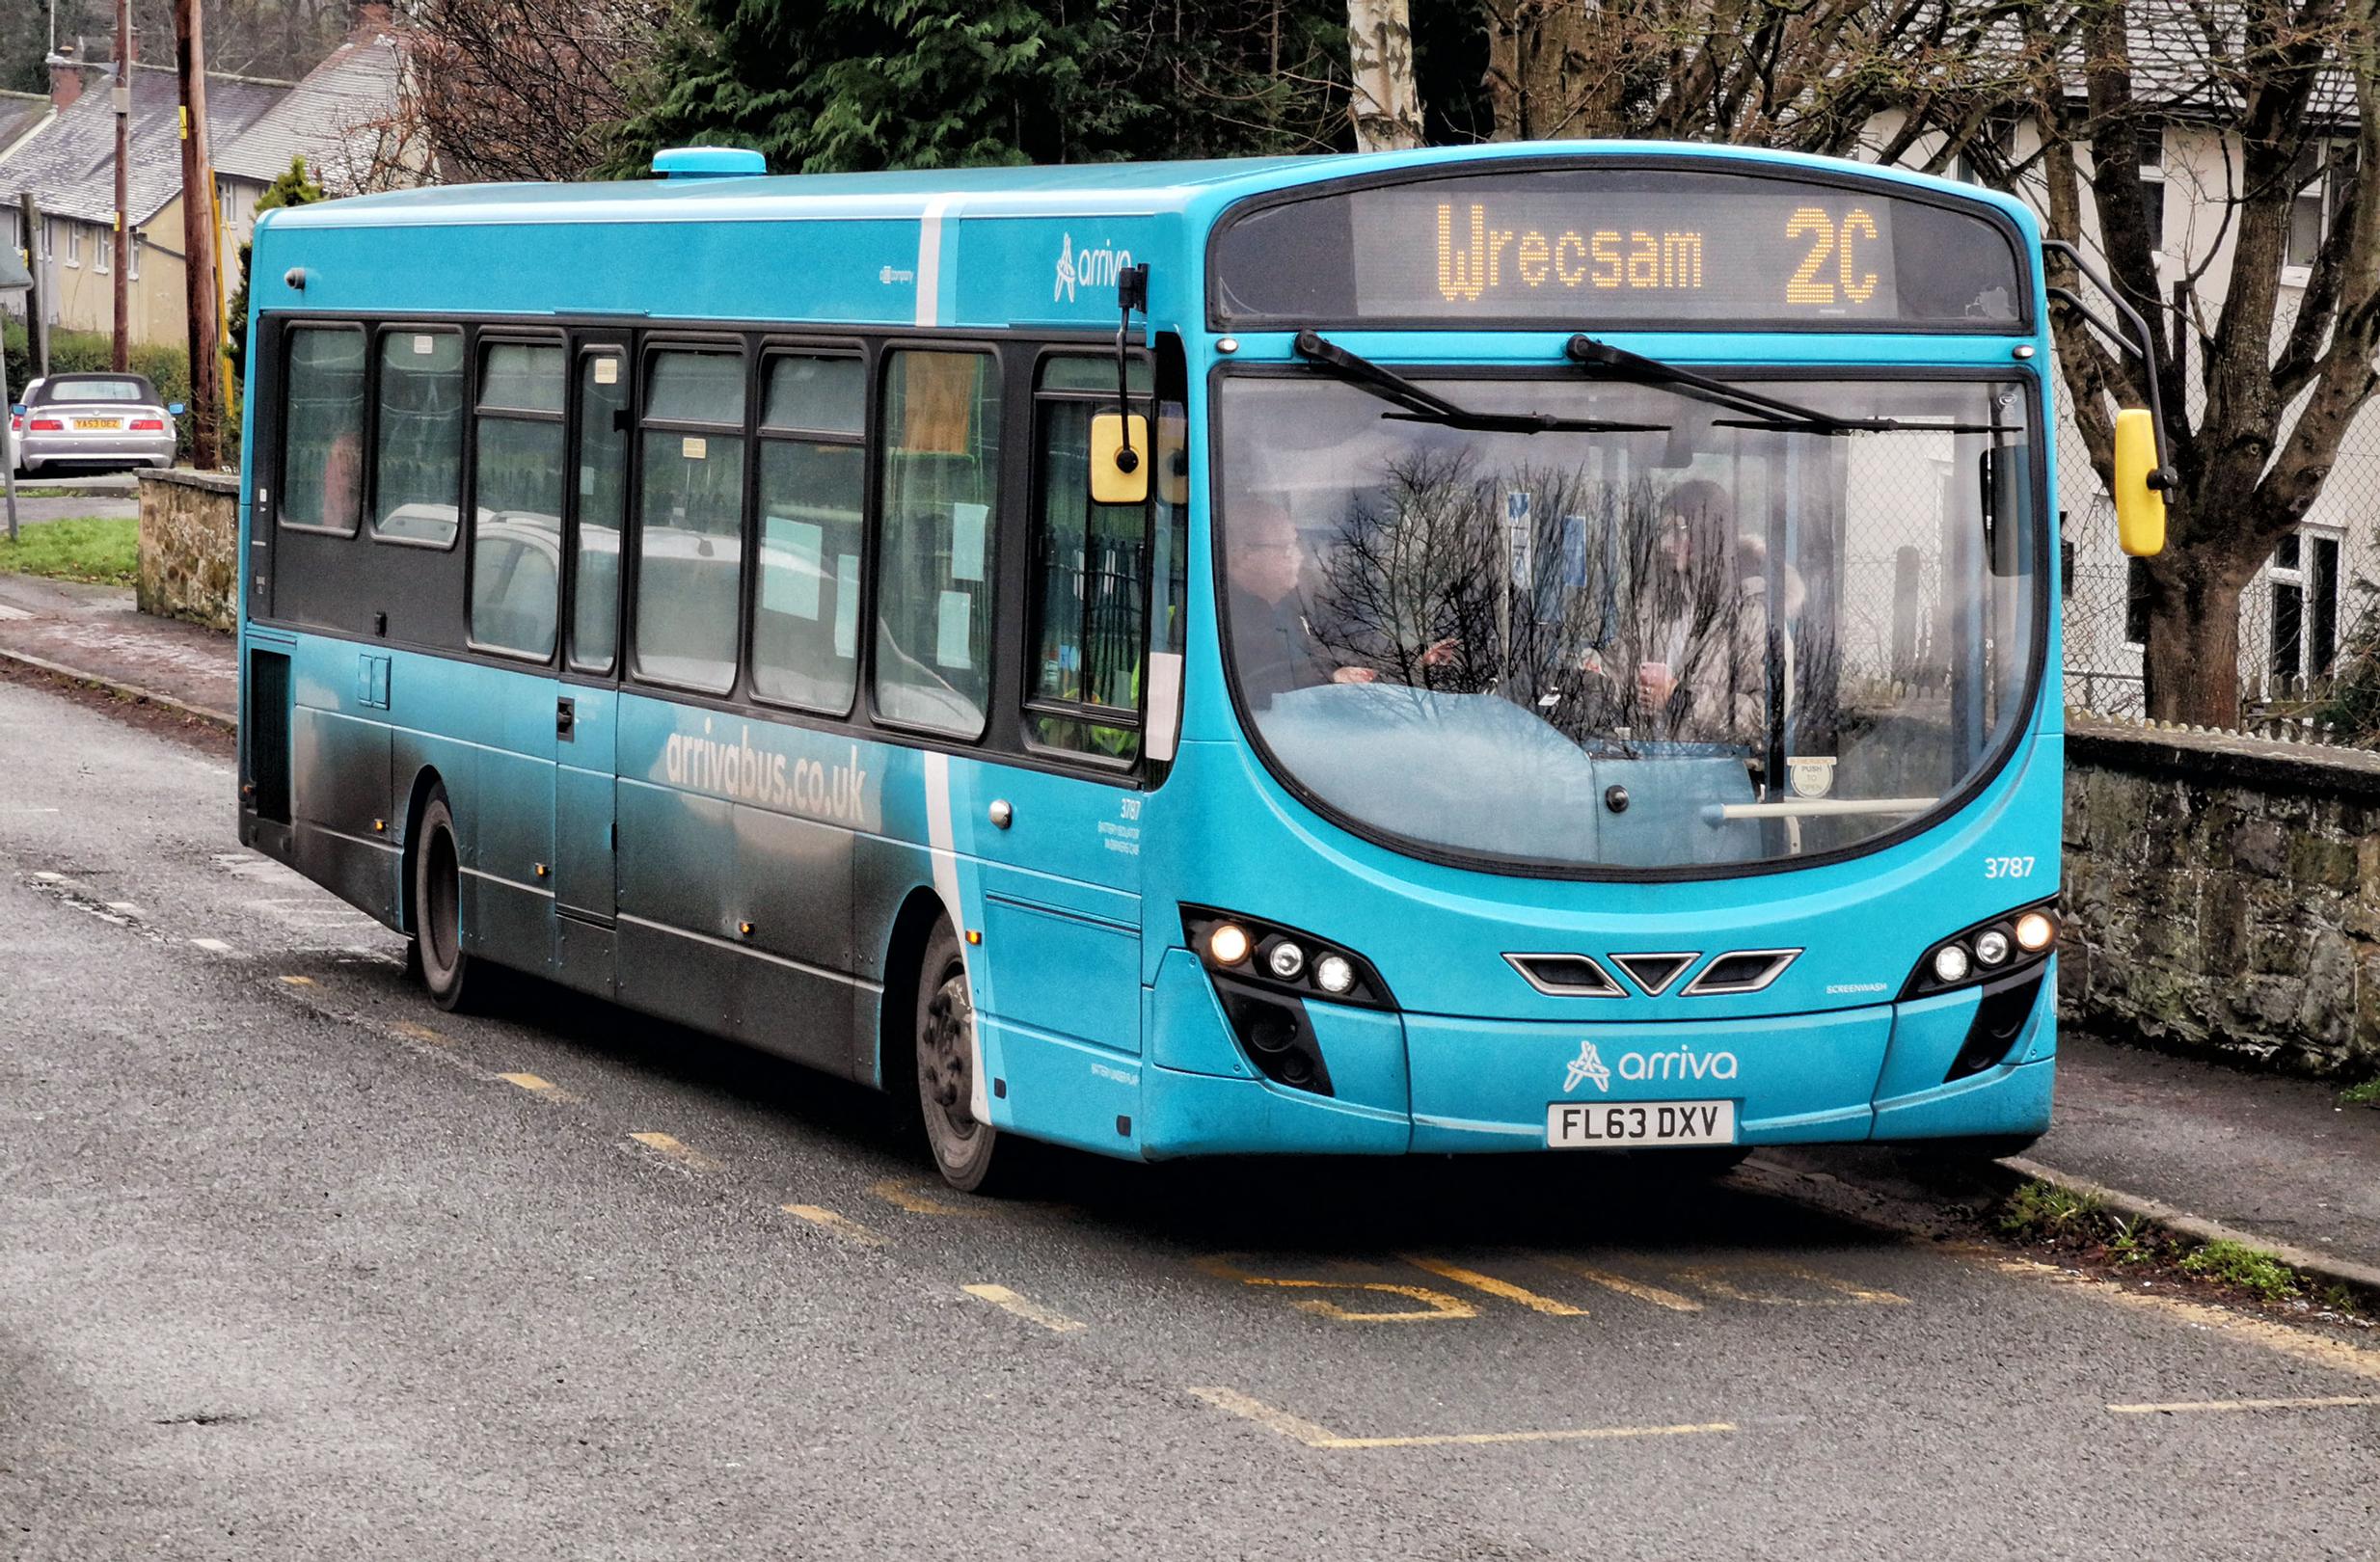 Wrexham was one of three areas in Wales where the bus network was analysed